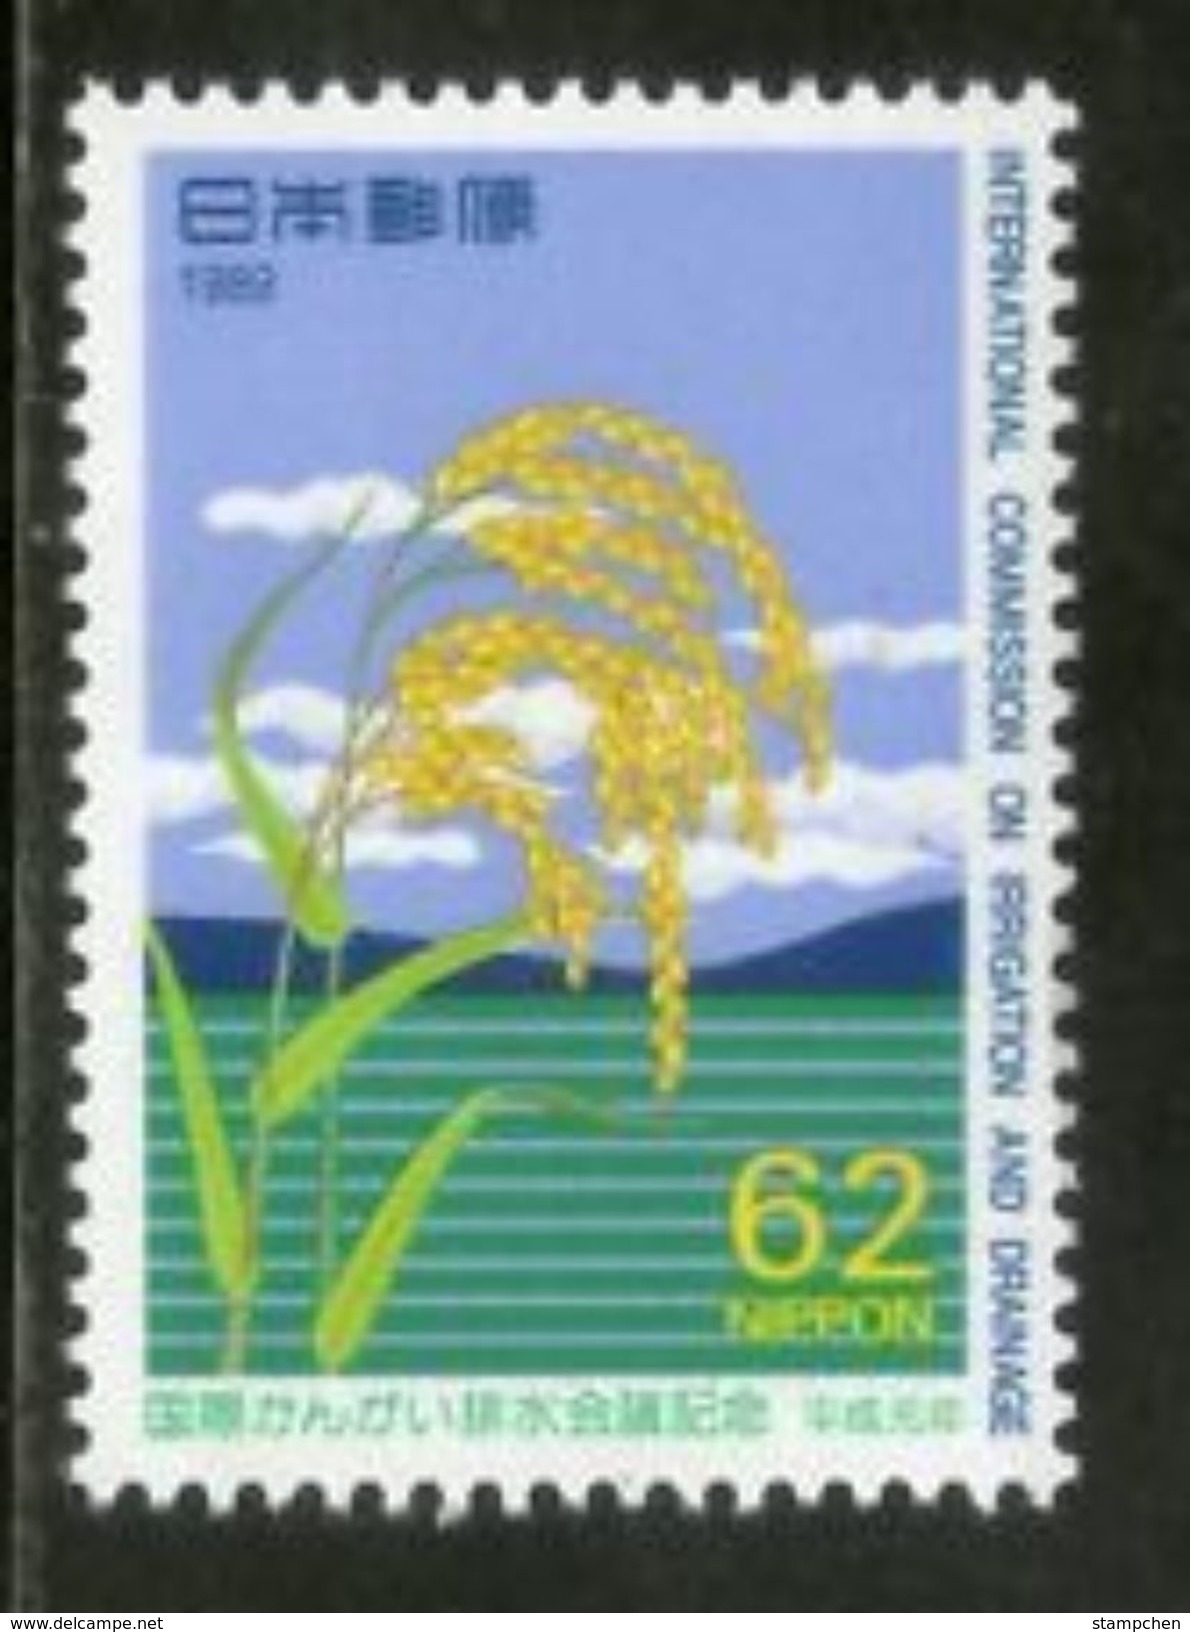 Japan 1989 Irrigation & Drainage Conference Stamp Rice Farm Cloud - Agricoltura